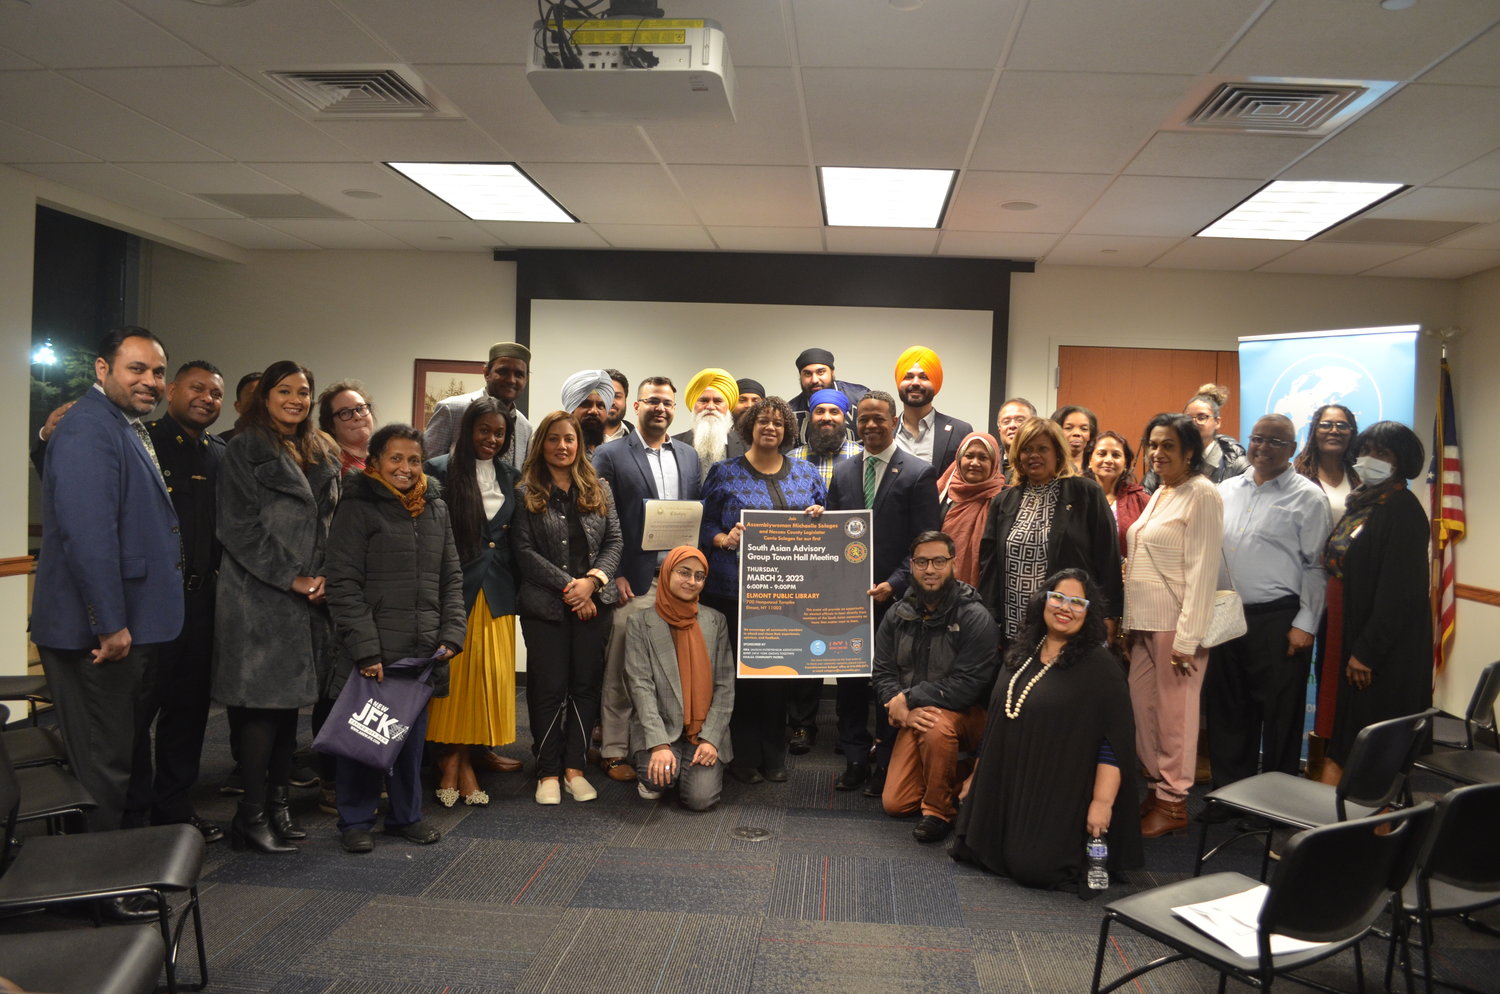 The first-ever South Asian Advisory Group Town Hall drew dozens of South Asian people from various backgrounds and neighborhoods, with the goal of bringing awareness to important matters. Assemblywoman Michaelle Solages and her brother, County Legislator Carrié Solages, center right, holding poster, listened to the participants’ concerns and posed potential solutions.